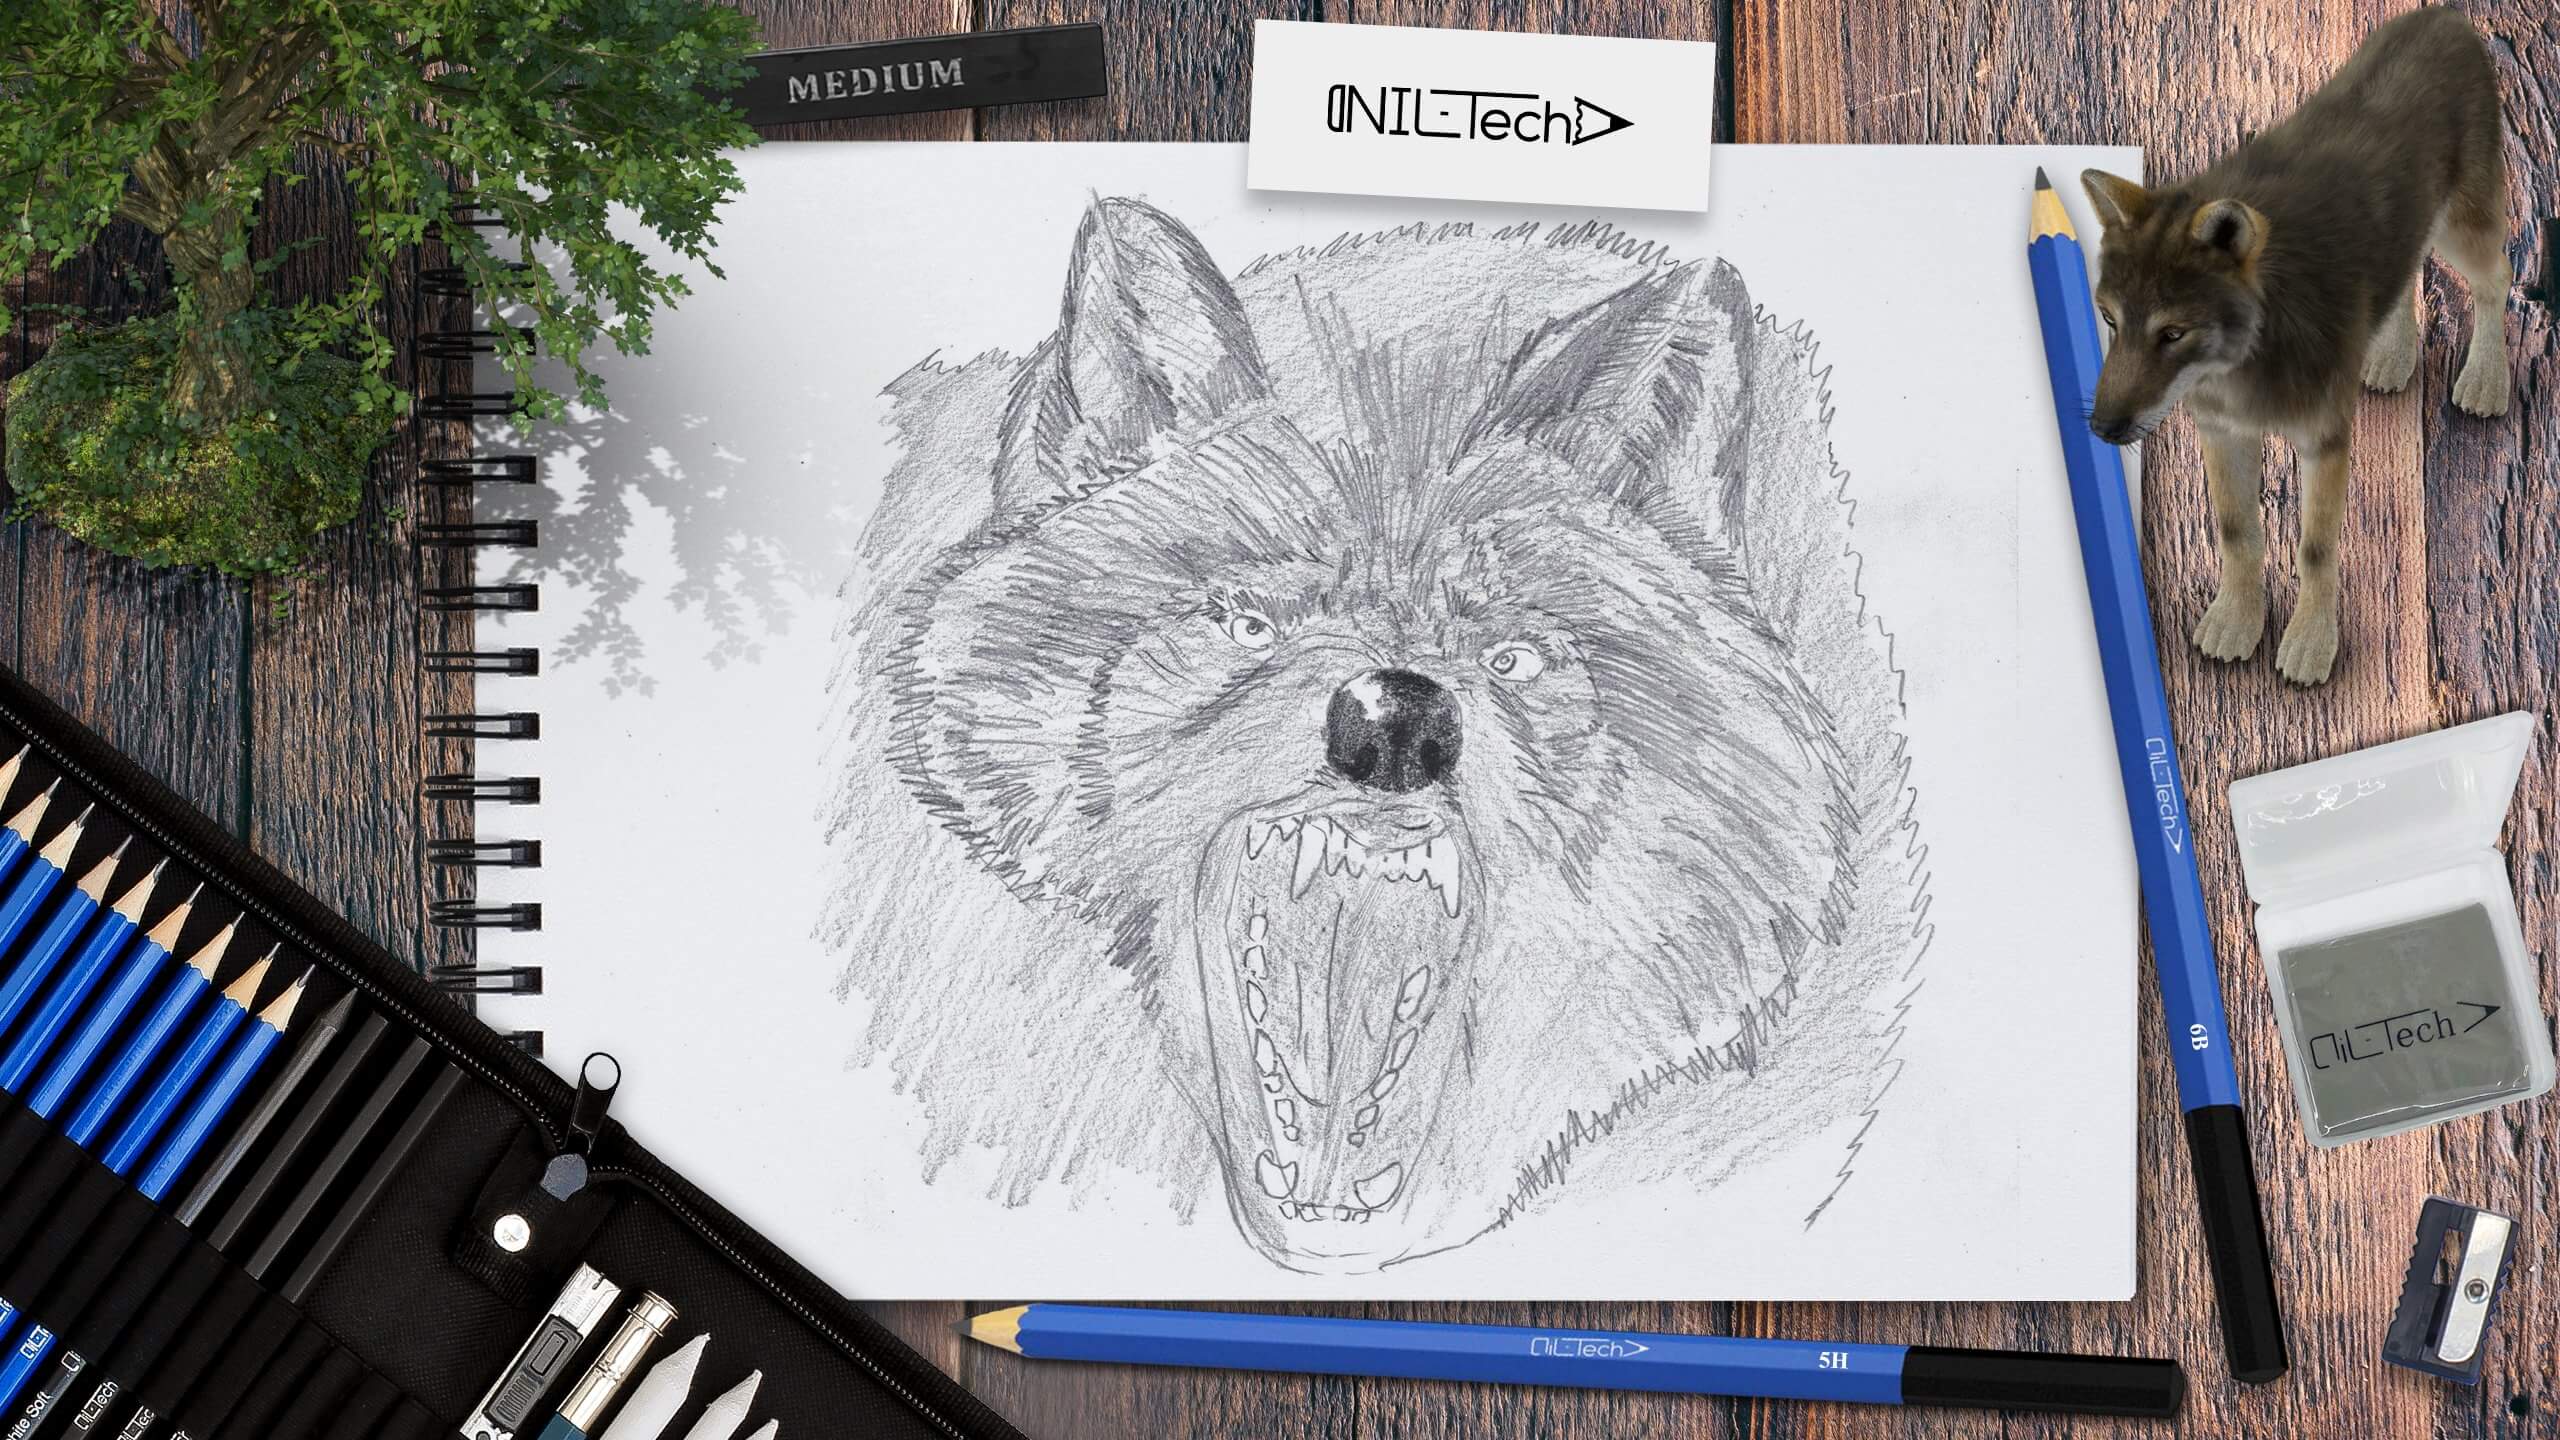 Svg Tempolate Raster 267 5jcjsid - Howling Wolf Drawing Transparent  Transparent PNG - 405x560 - Free Download on NicePNG